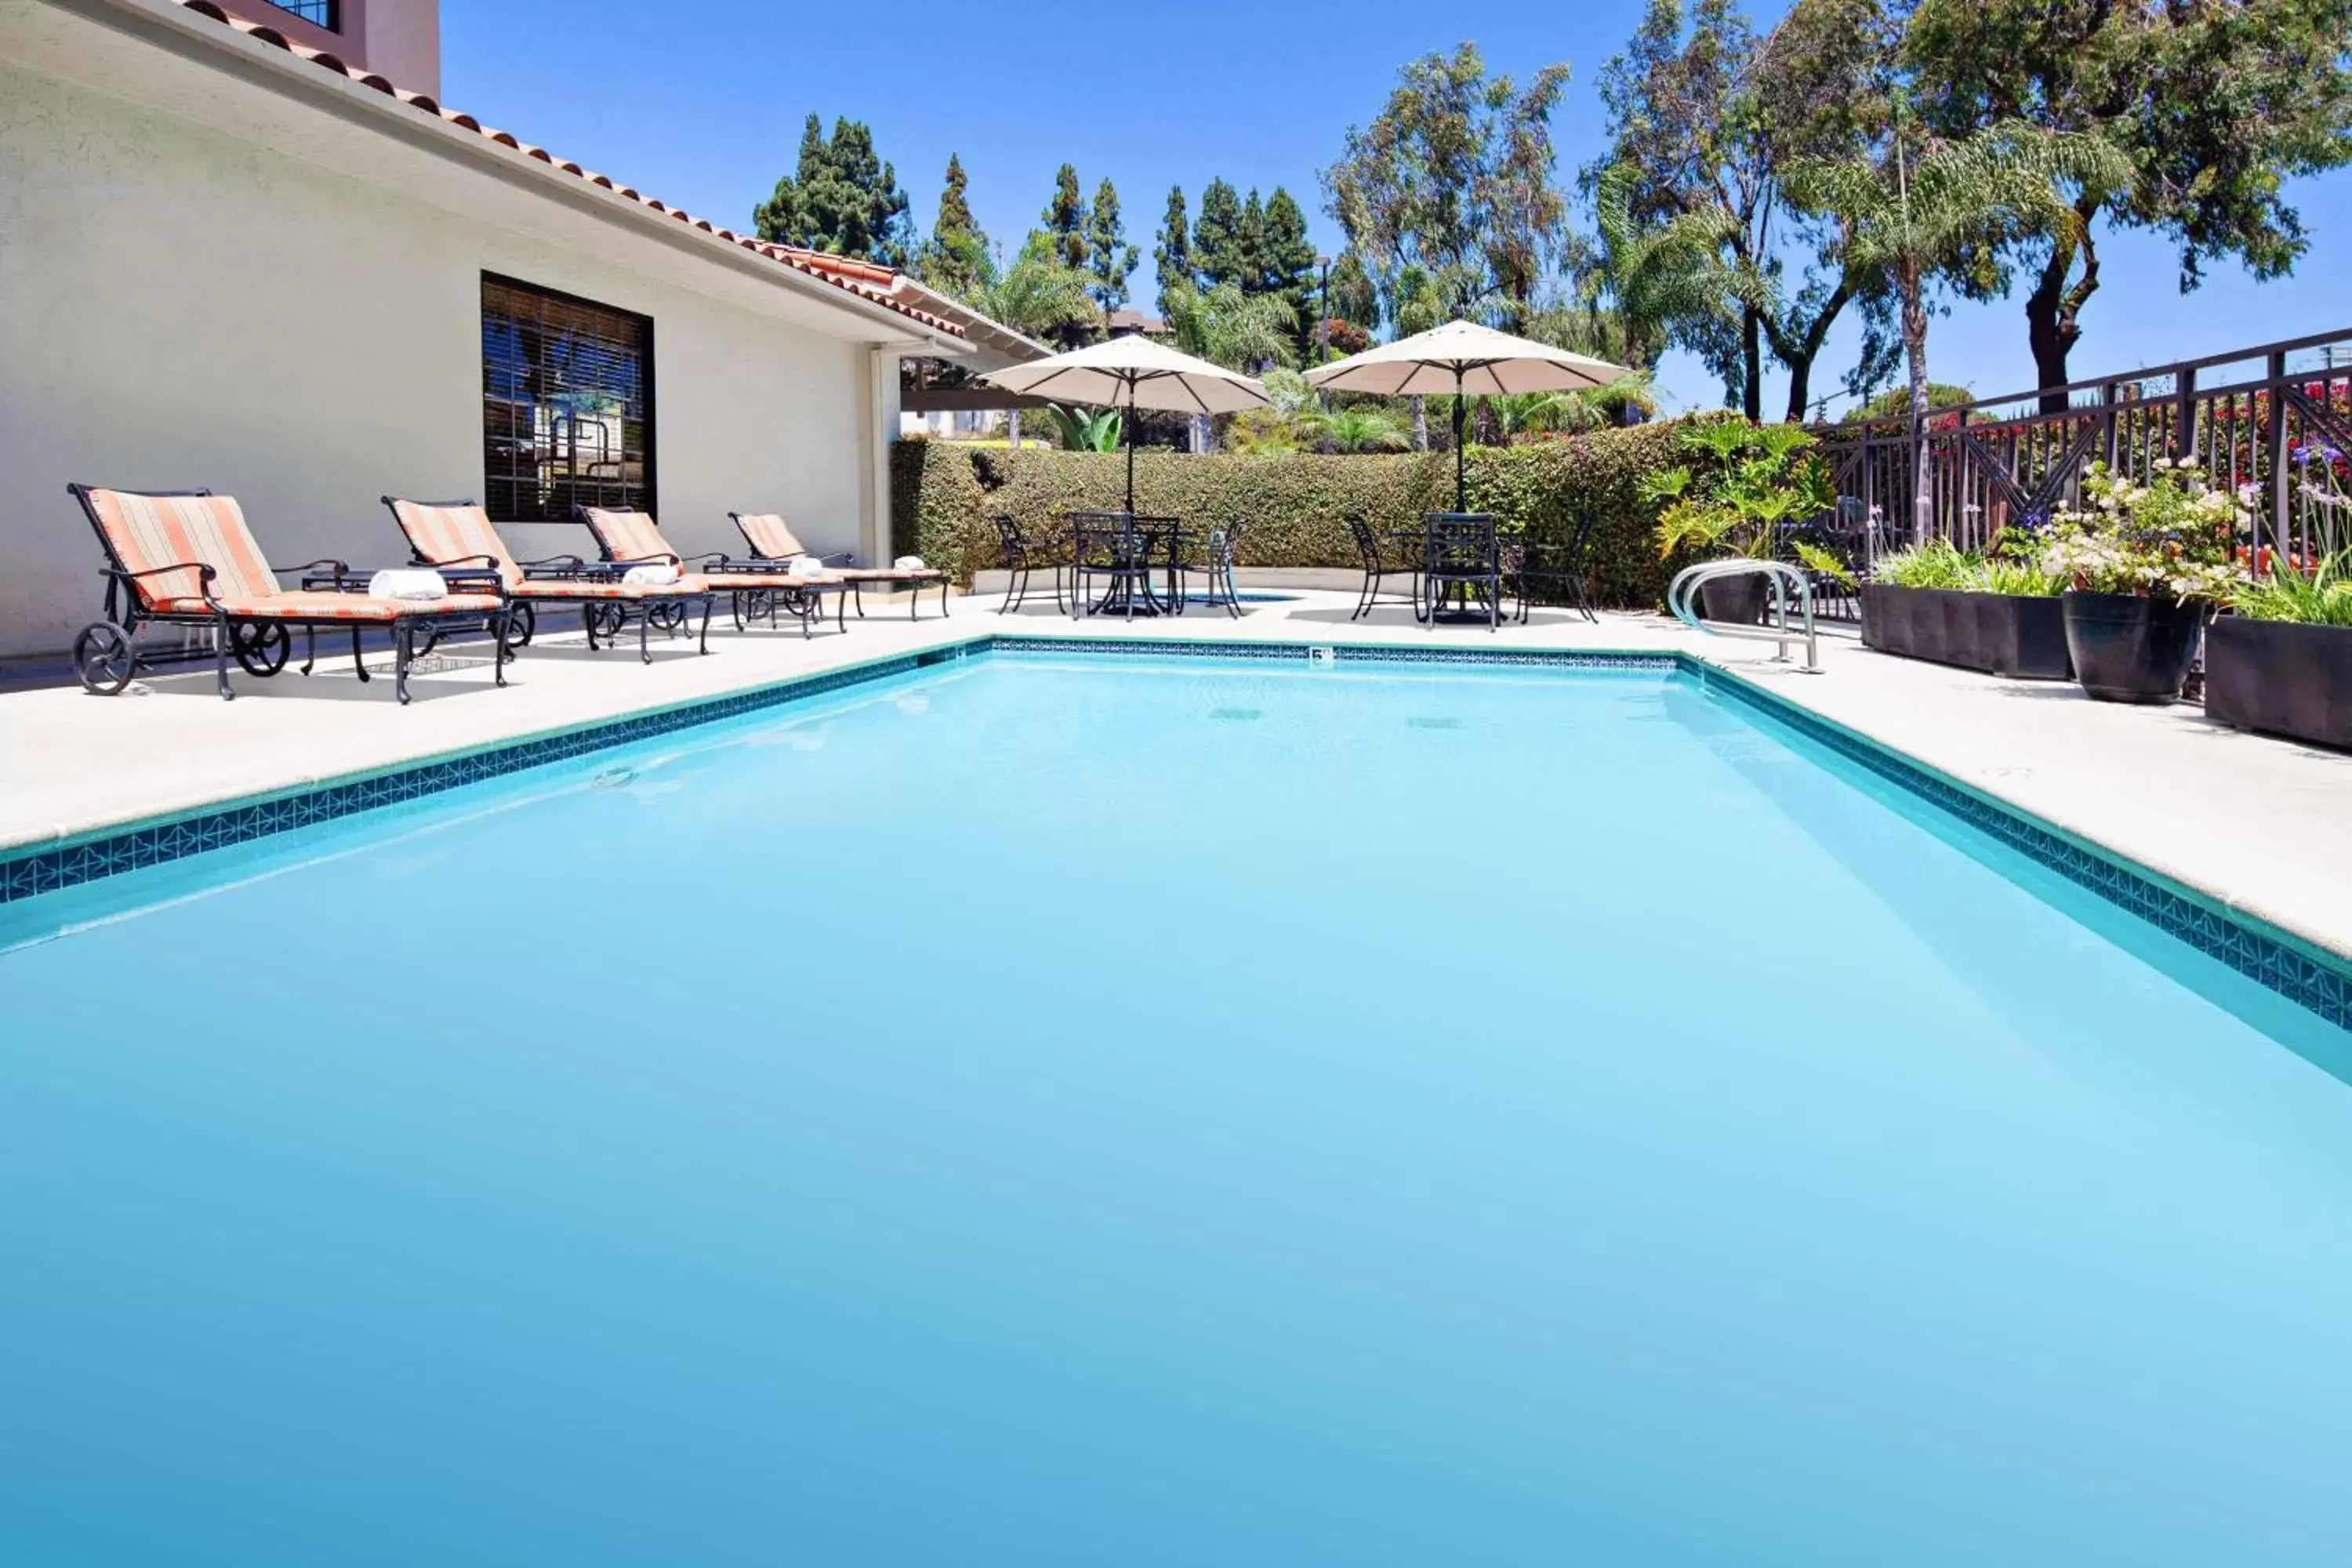 On site, Swimming Pool in Best Western Chula Vista/Otay Valley Hotel